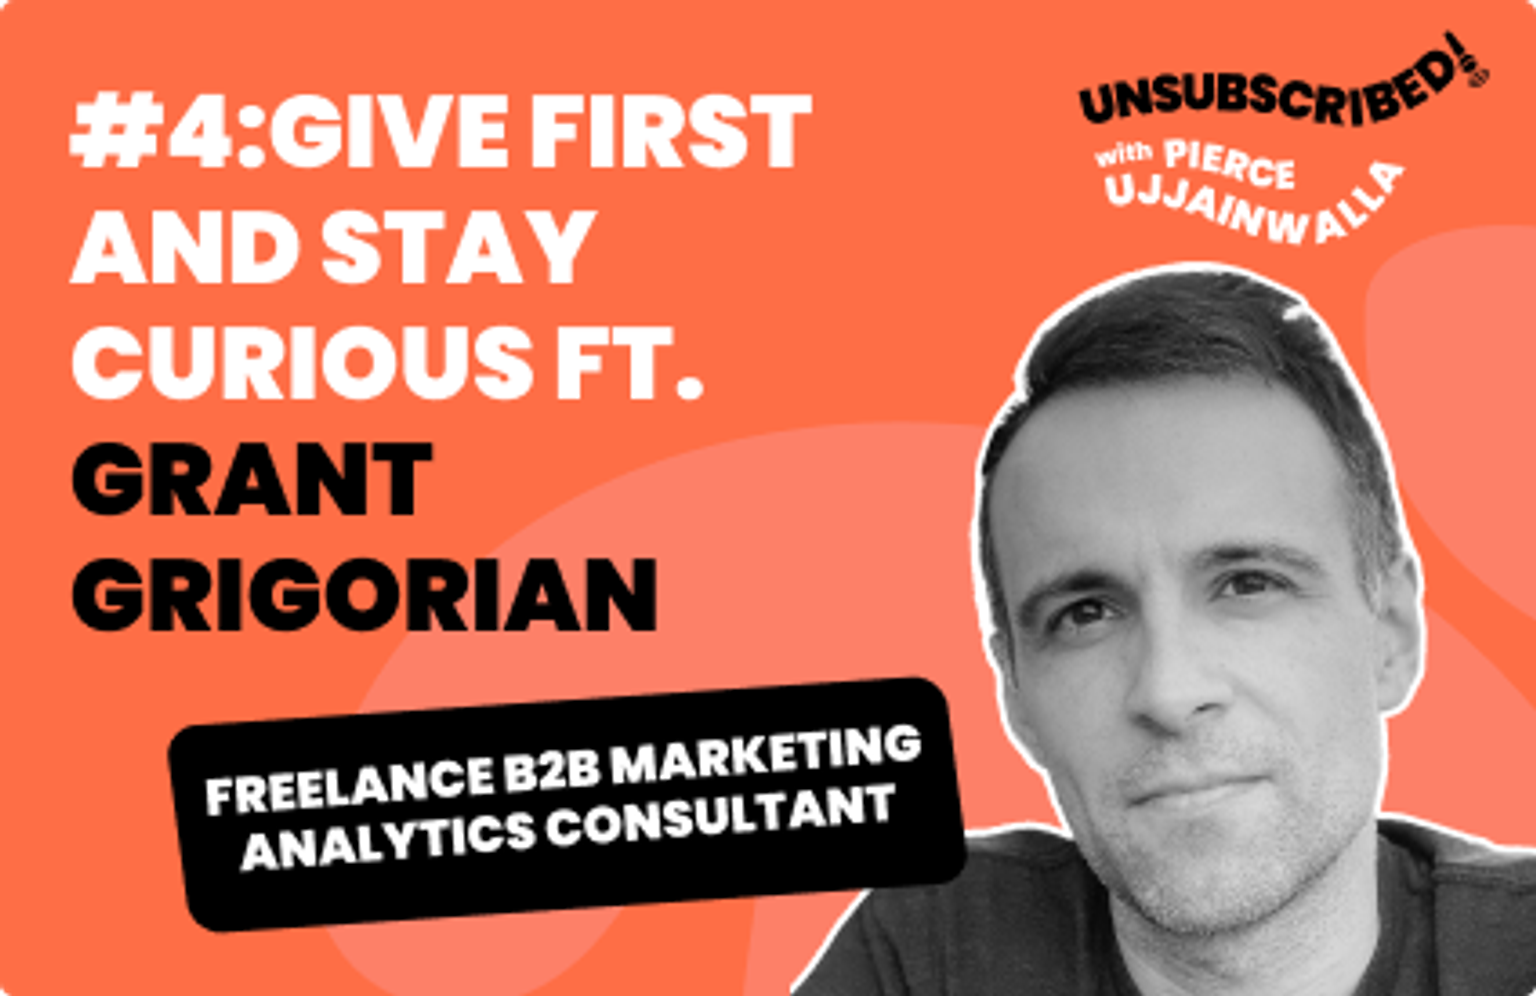 #04 Give First and Stay Curious ft. Grant Grigorian, B2B Marketing Analytics Consultant